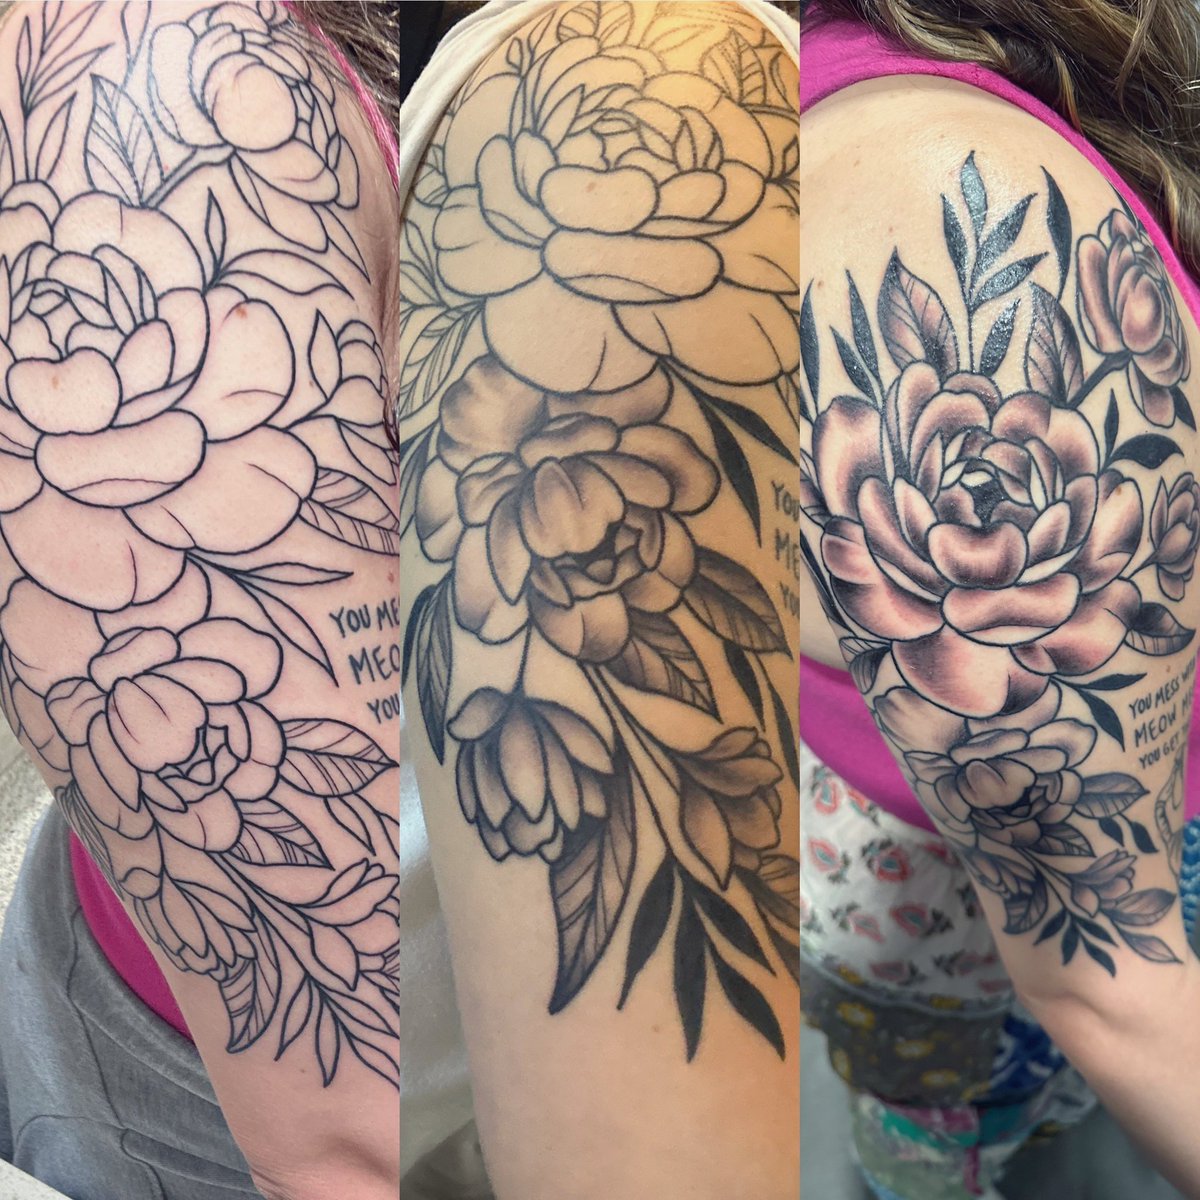 Finally done 🥳
#tattoo #beforeafter